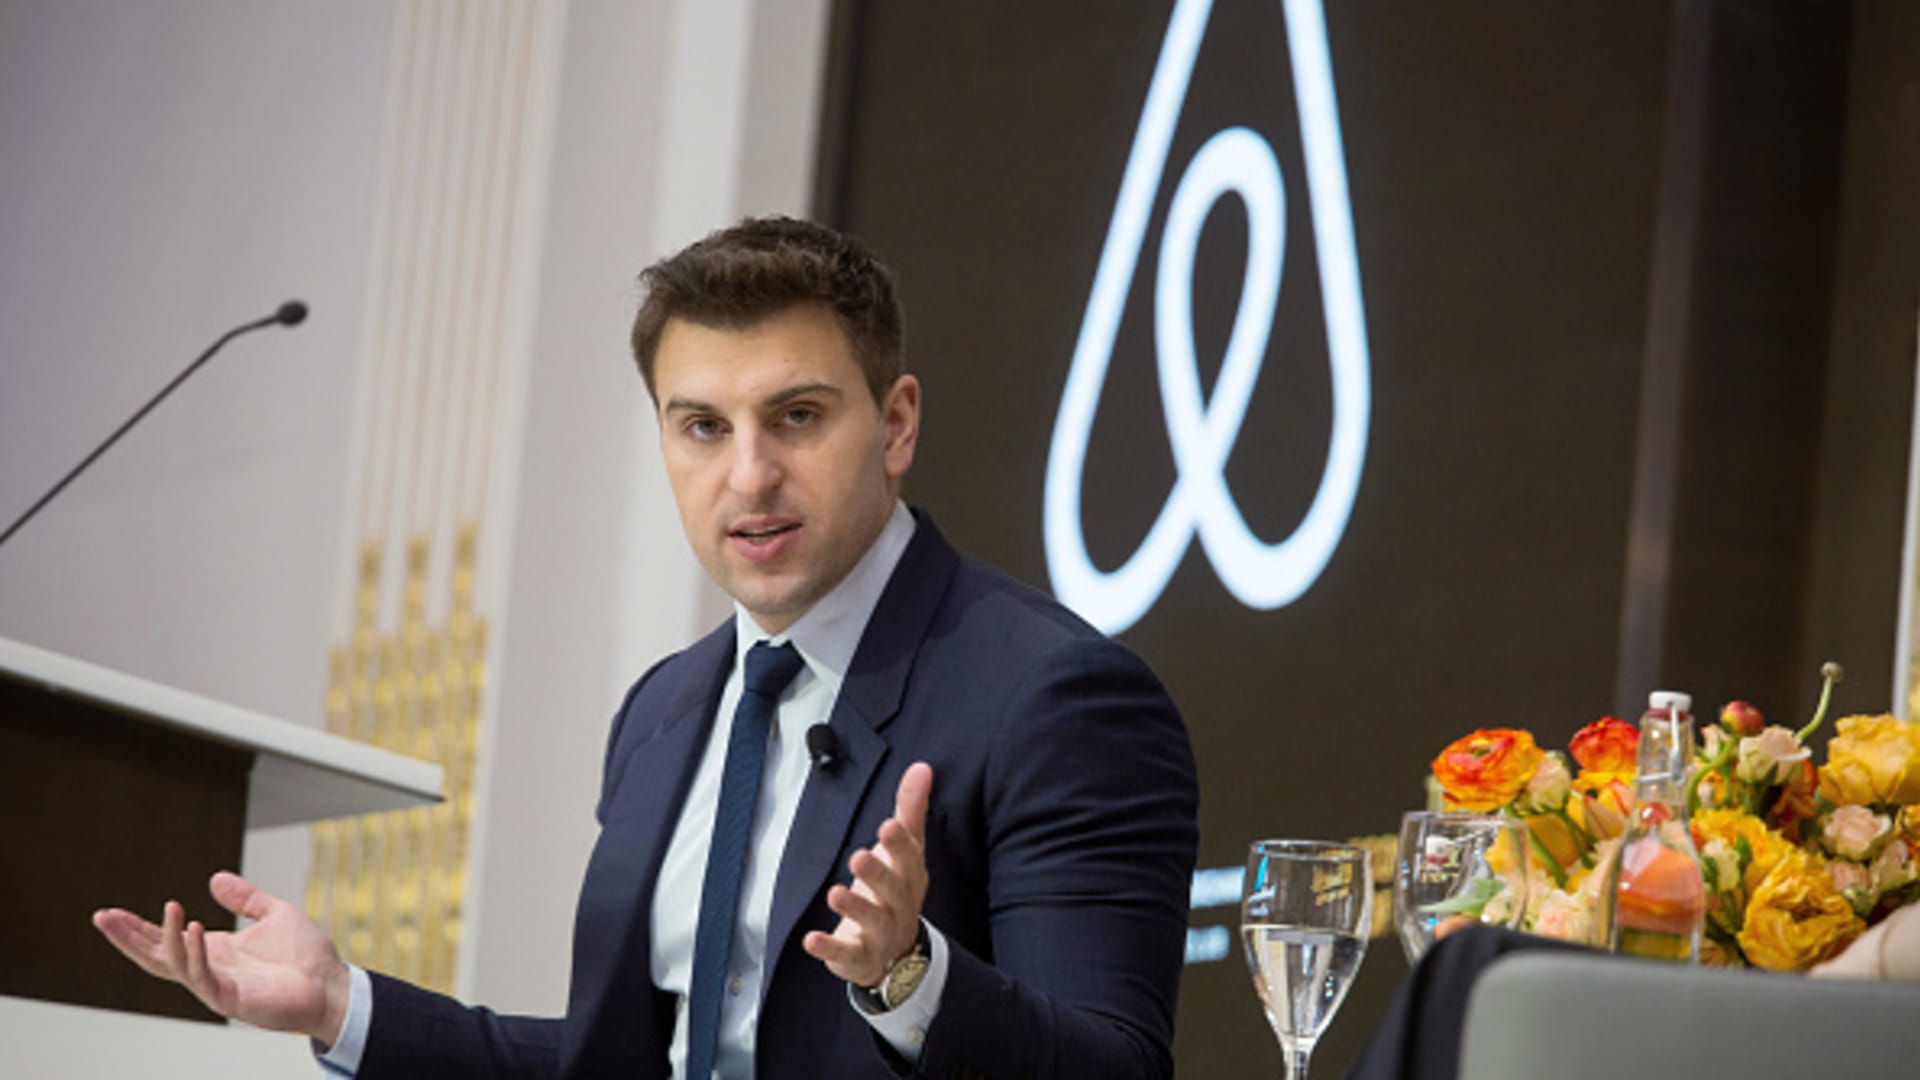 Airbnb seeks $47 billion valuation, prices shares at $68 in IPO